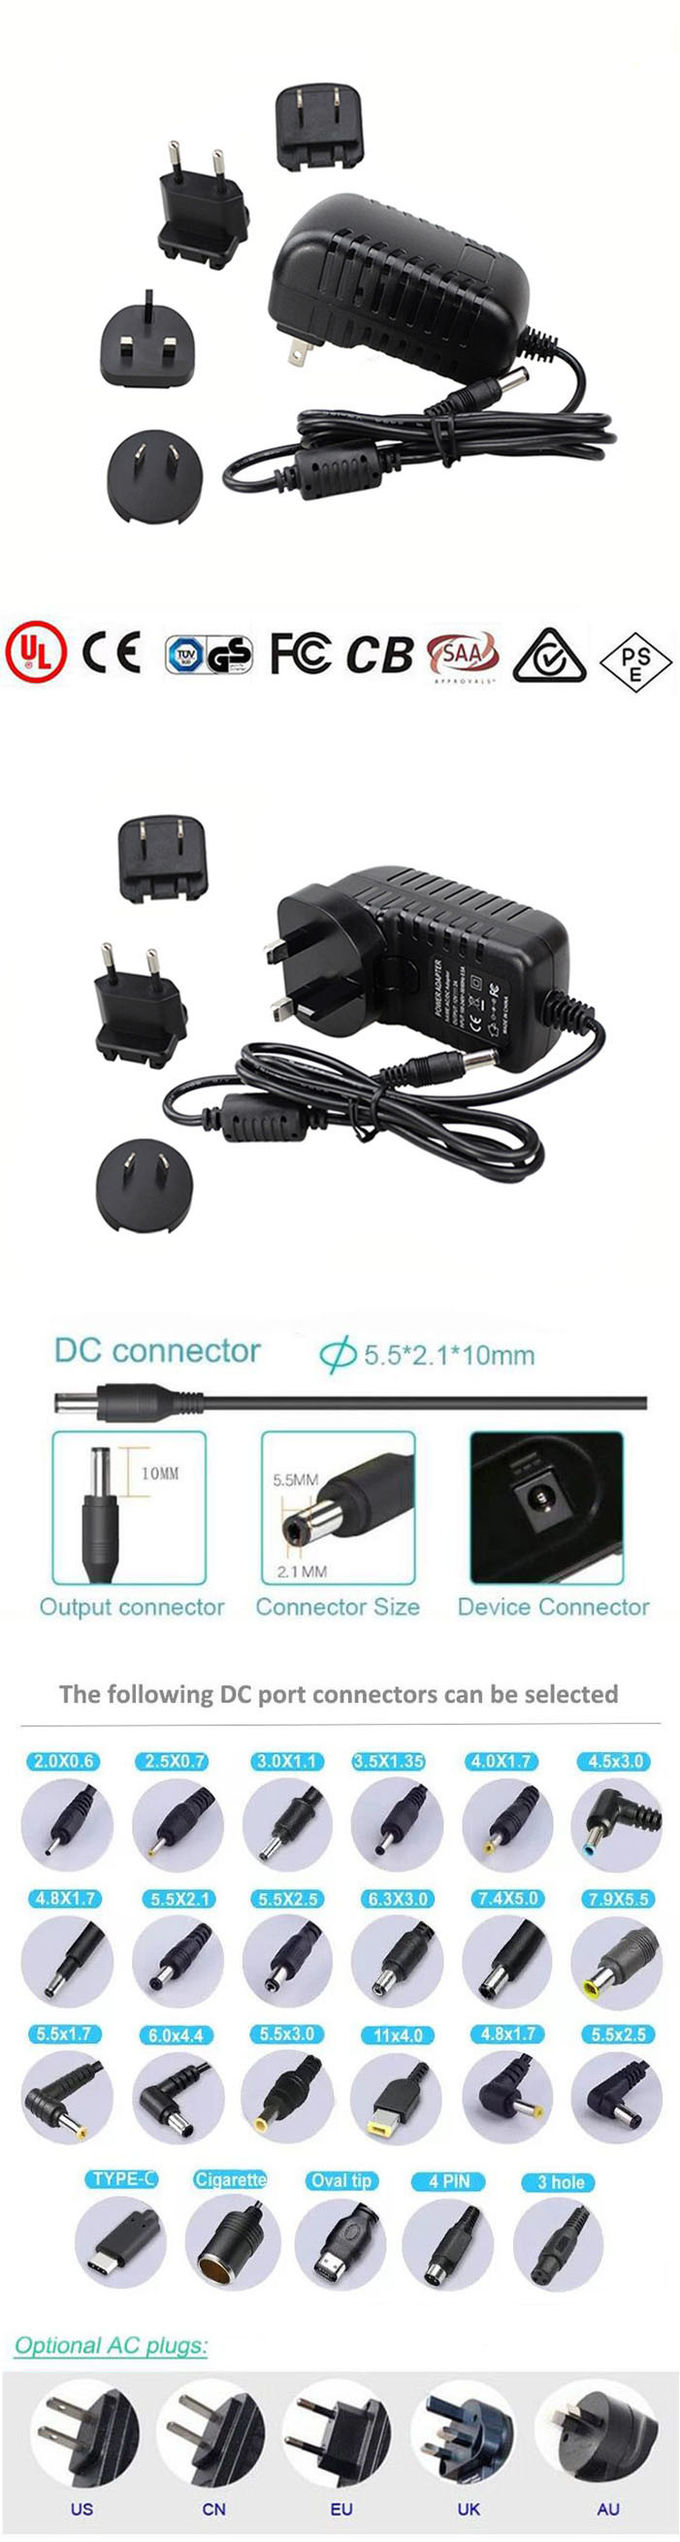 9V 1A AC Switching Adapter Interchangeable Plug Adapter 2 Years Warranty 0